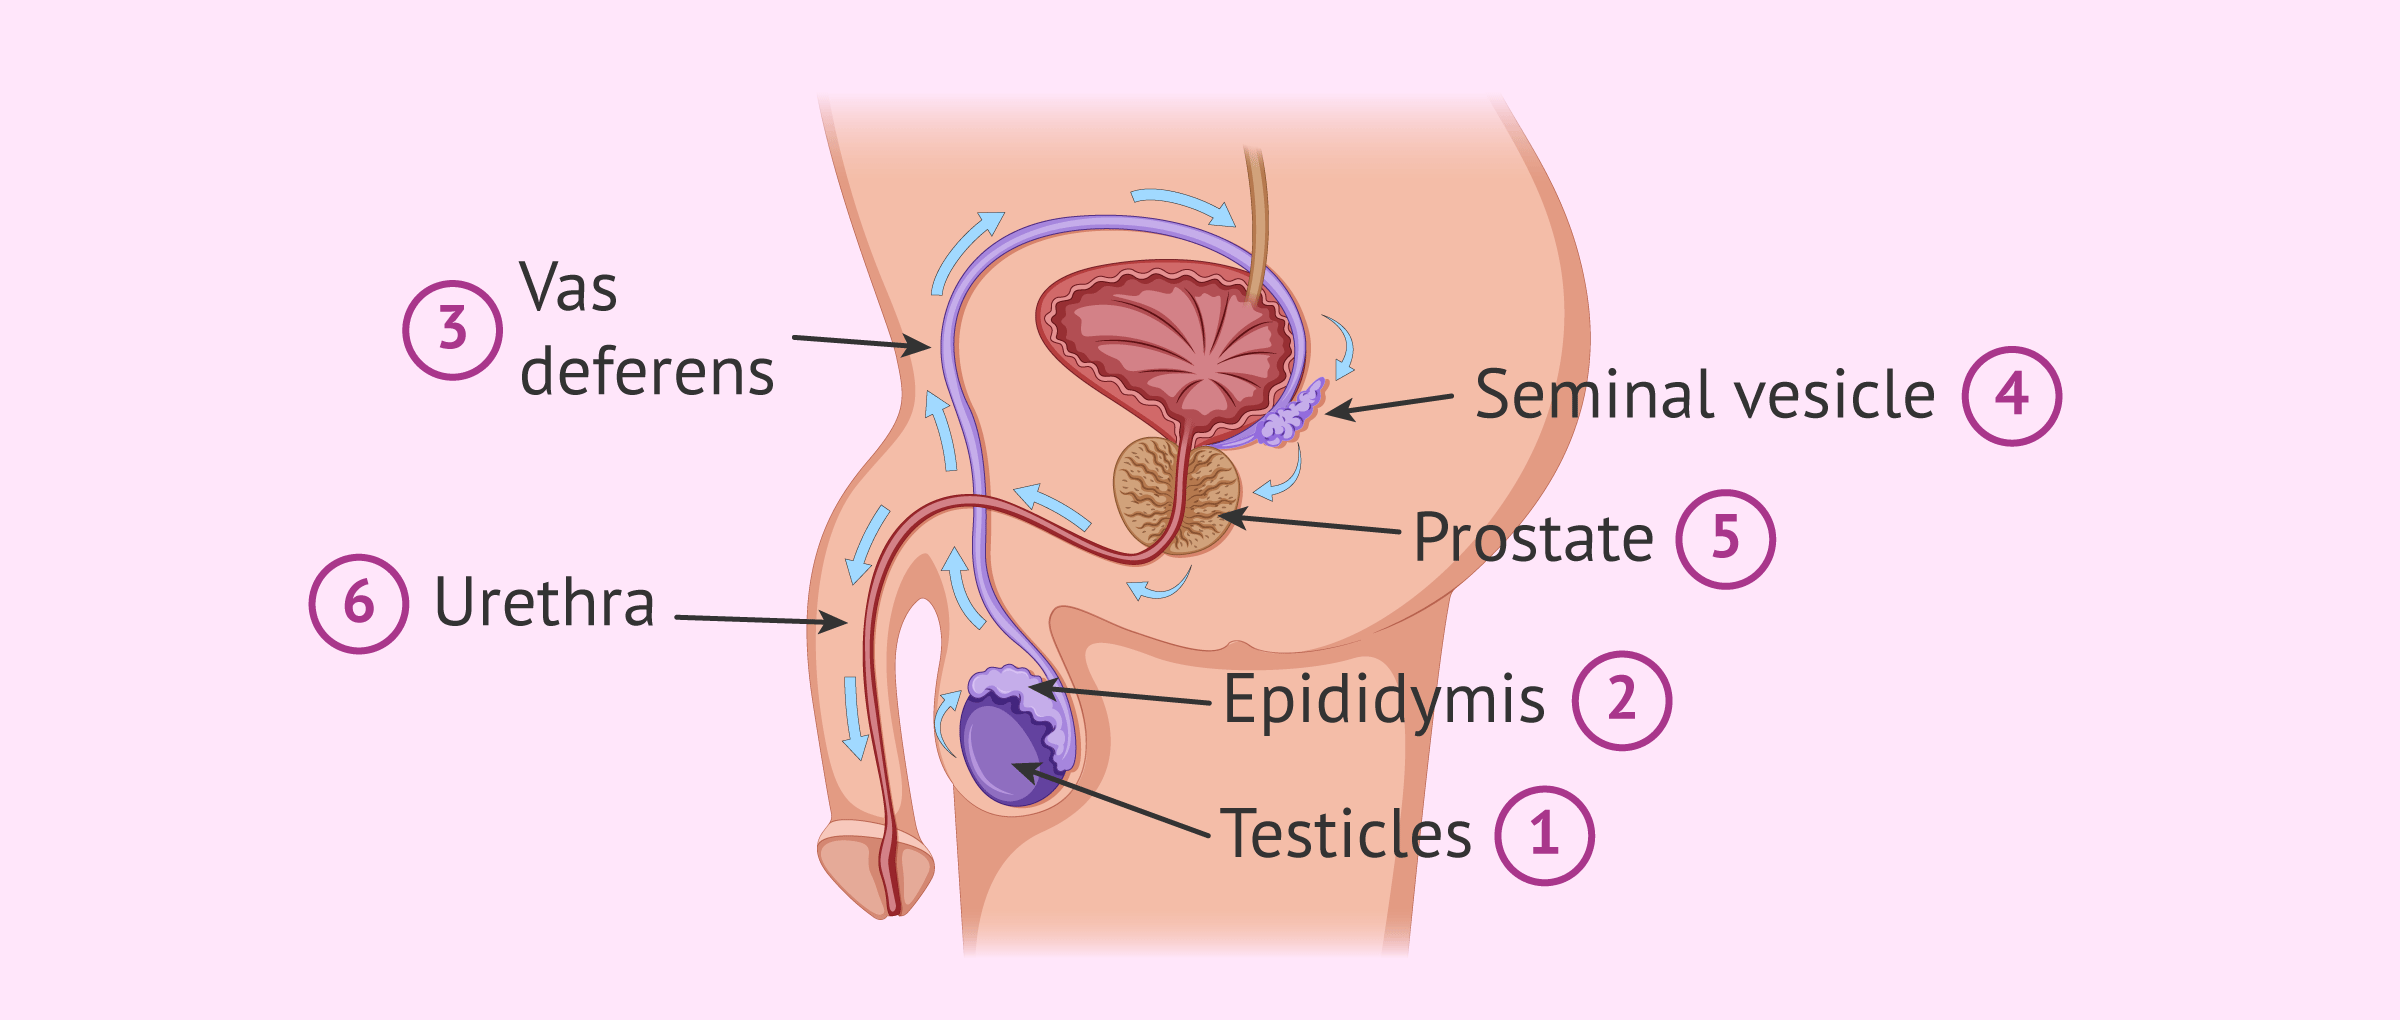 Route of the sperm from formation to expulsion